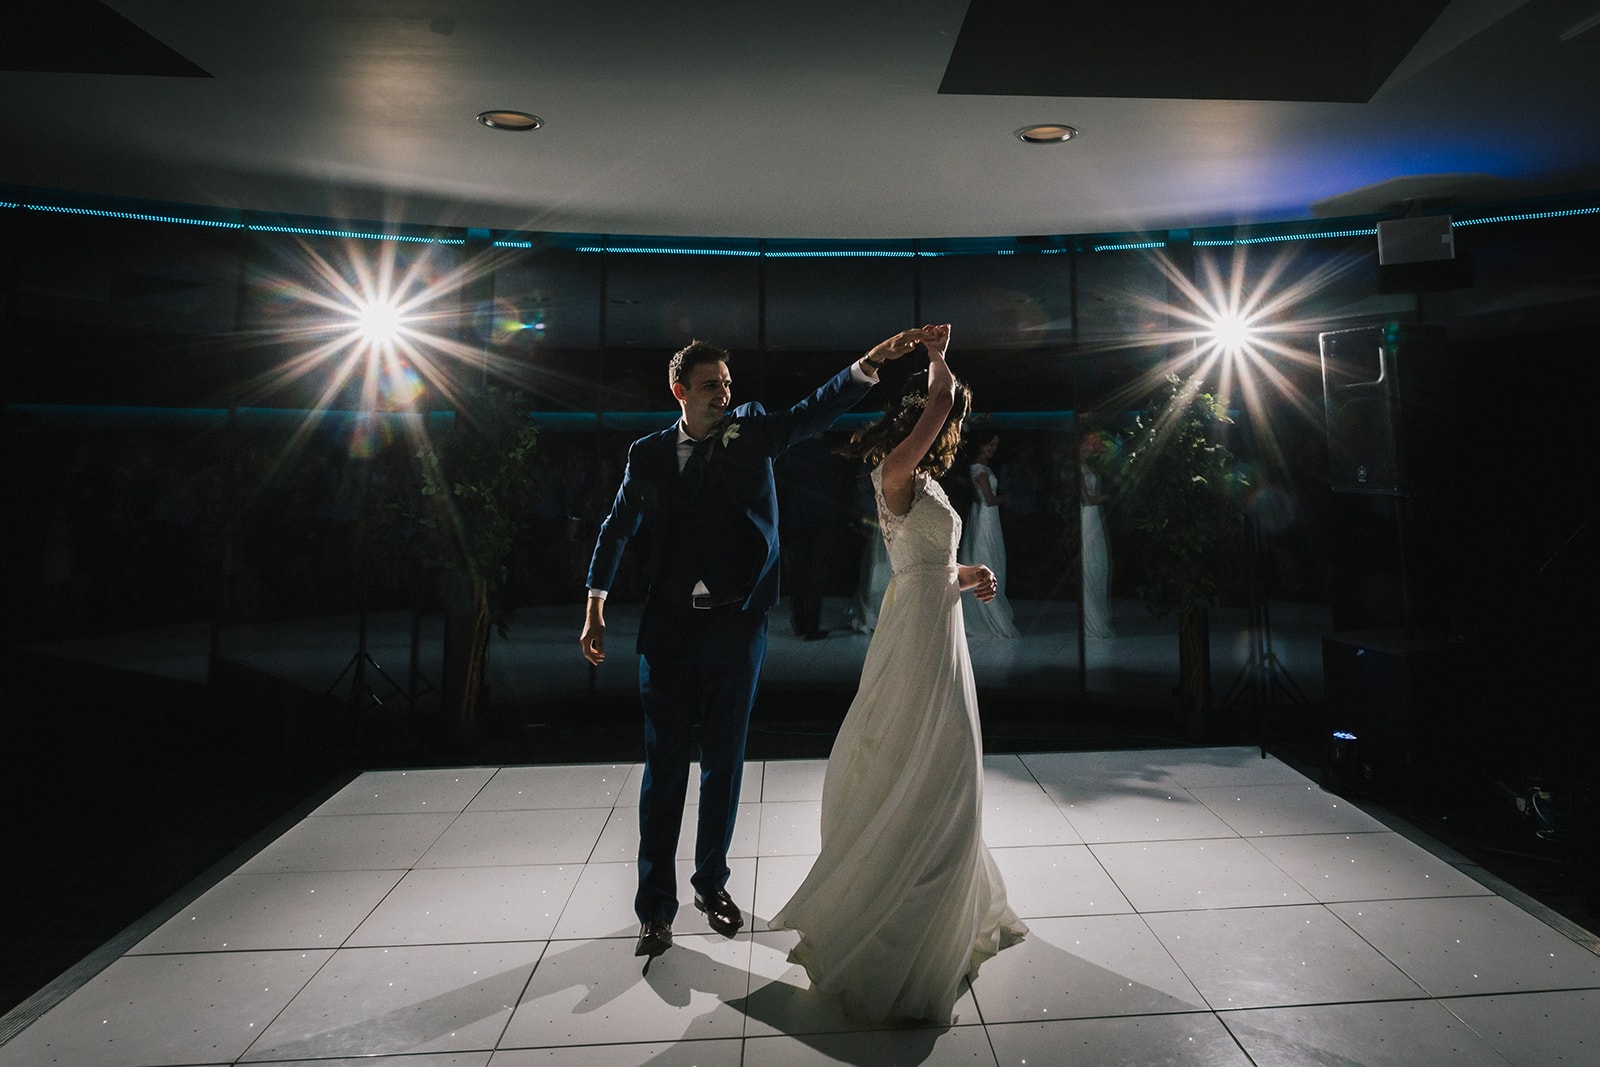 Bride and groom first dance at fairyhill by swansea wedding photographer.